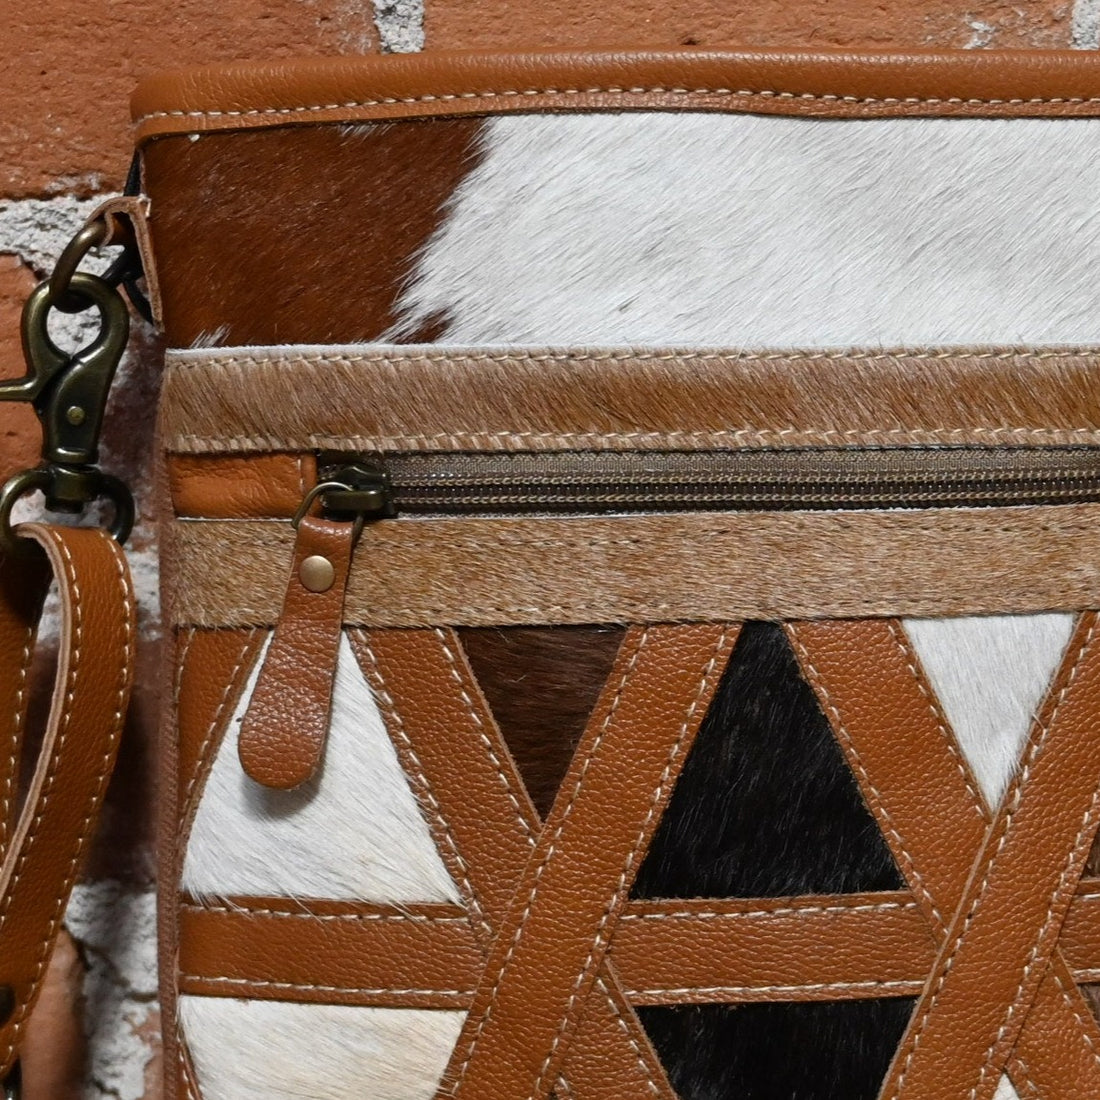 Myra Dakota Plains Hair on and Canvas Cross Body Bag with Criss Cross Accents view of close up